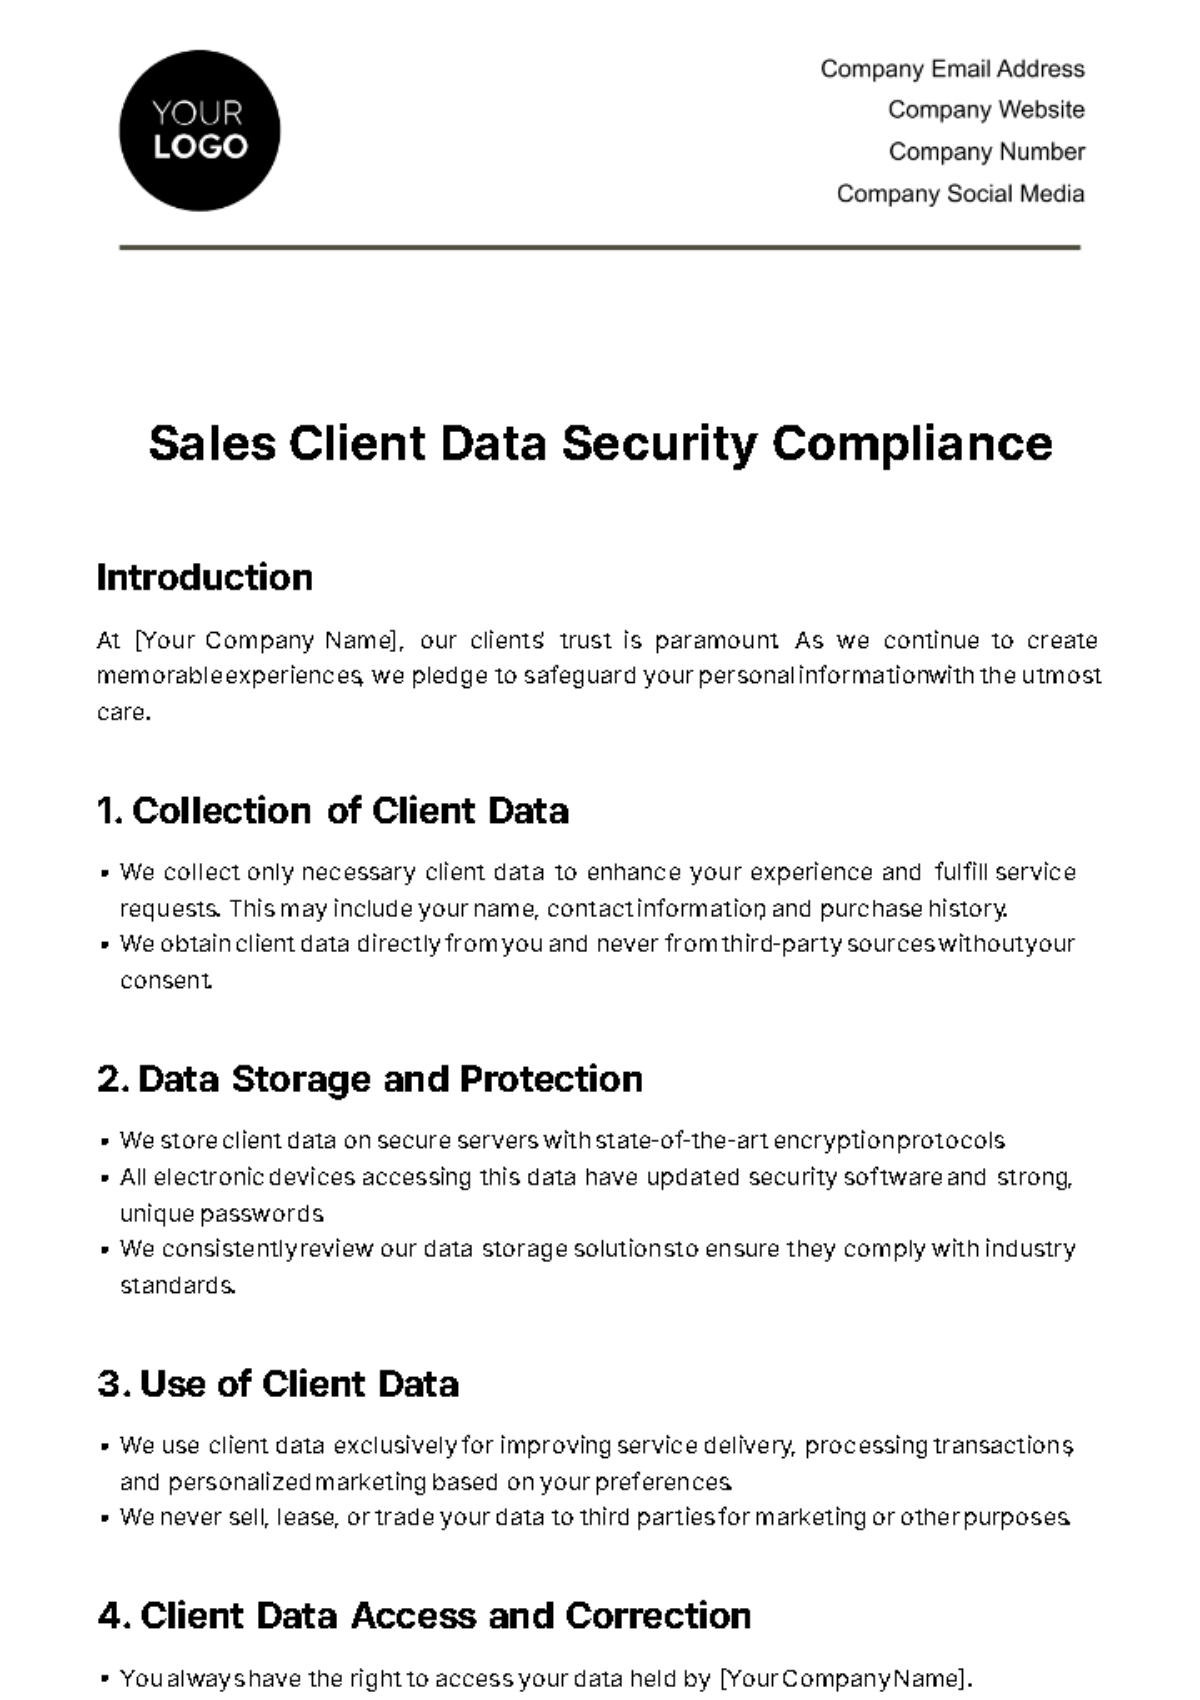 Free Sales Client Data Security Compliance Template